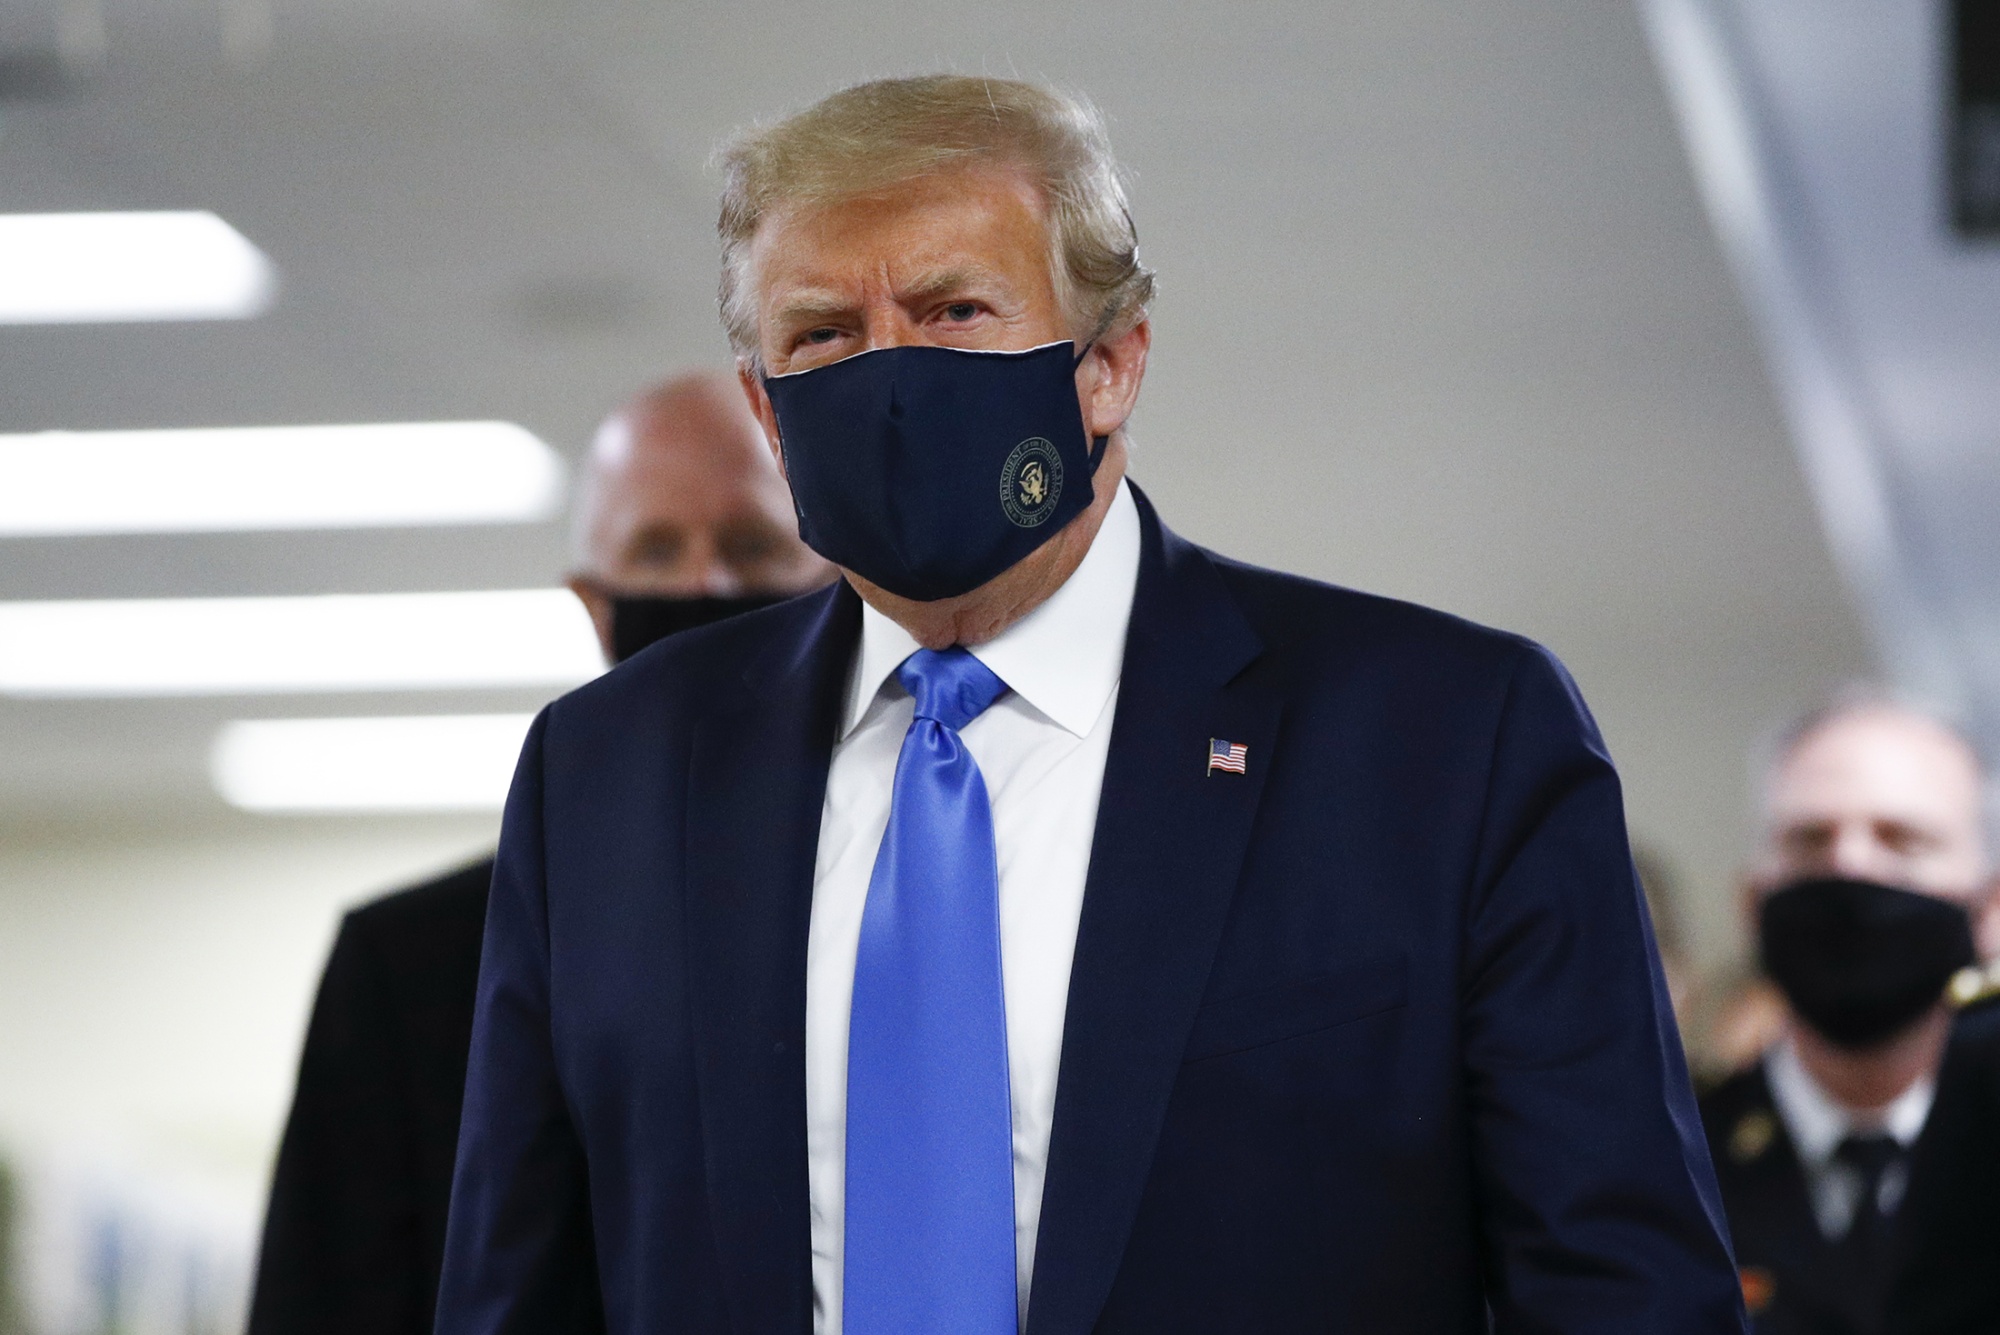 Donald Trump wears a mask at Walter Reed National Military Medical Center on July 11.